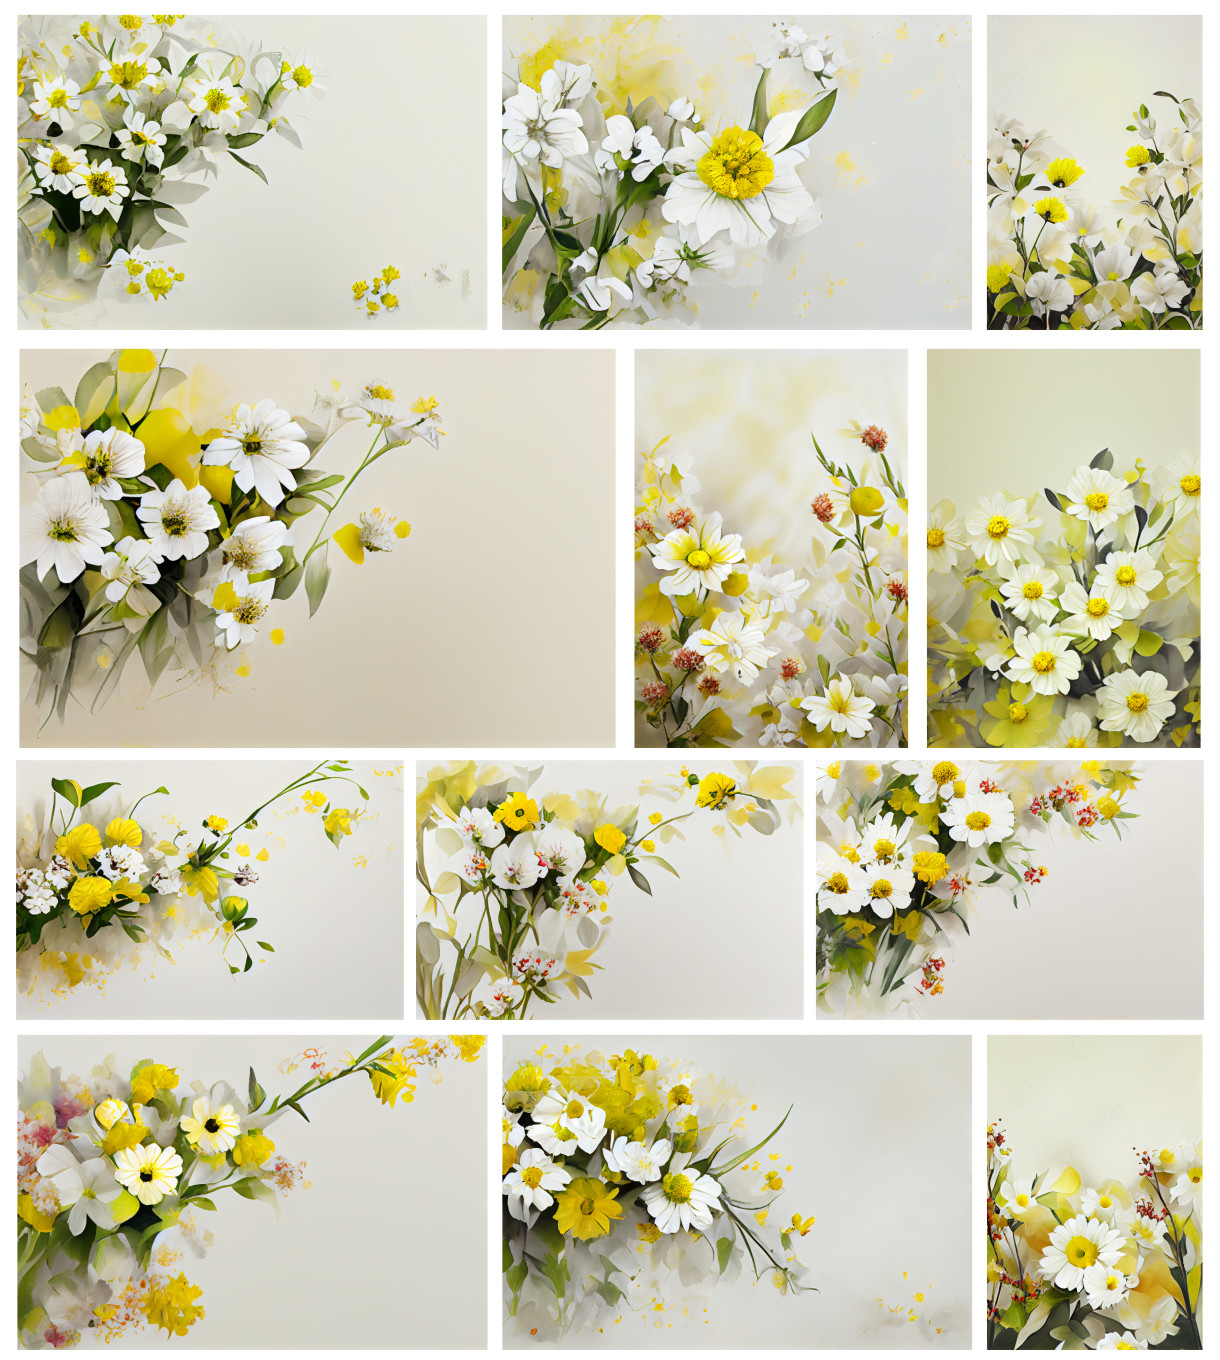 Blossoms in Harmony: 12 Yellow and White Flower Card Background Designs